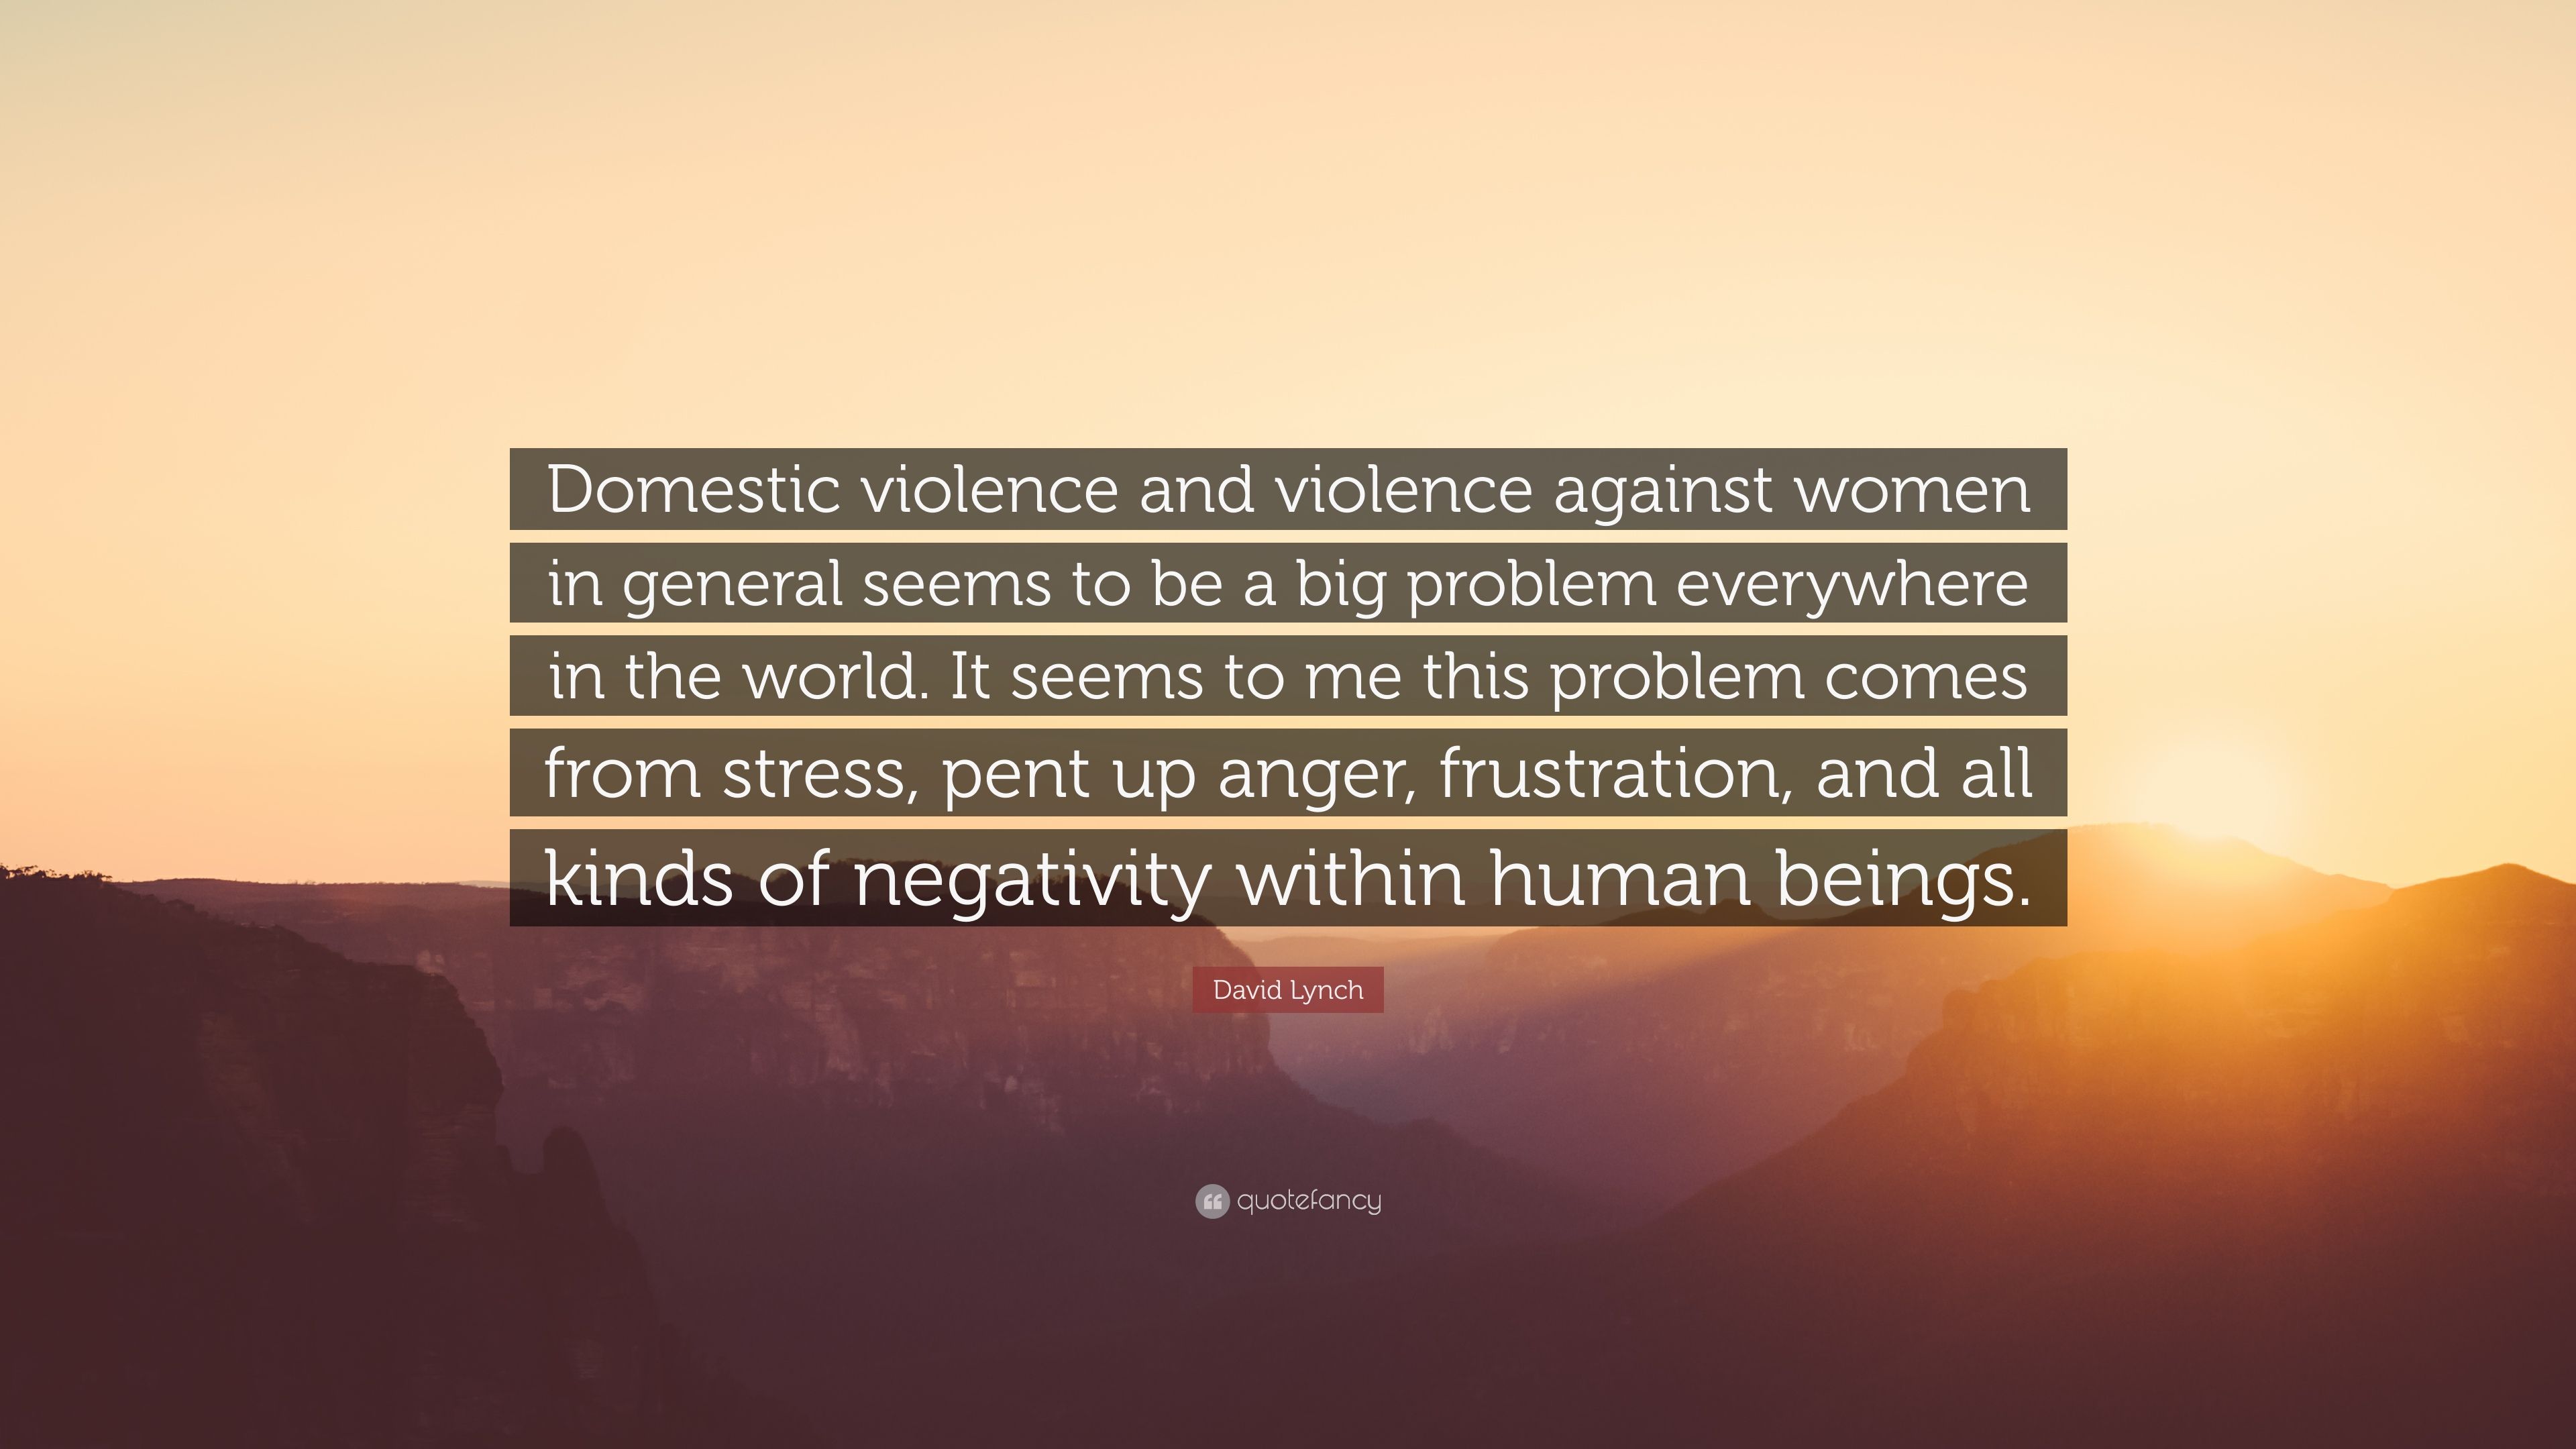 David Lynch Quote: “Domestic violence and violence against women